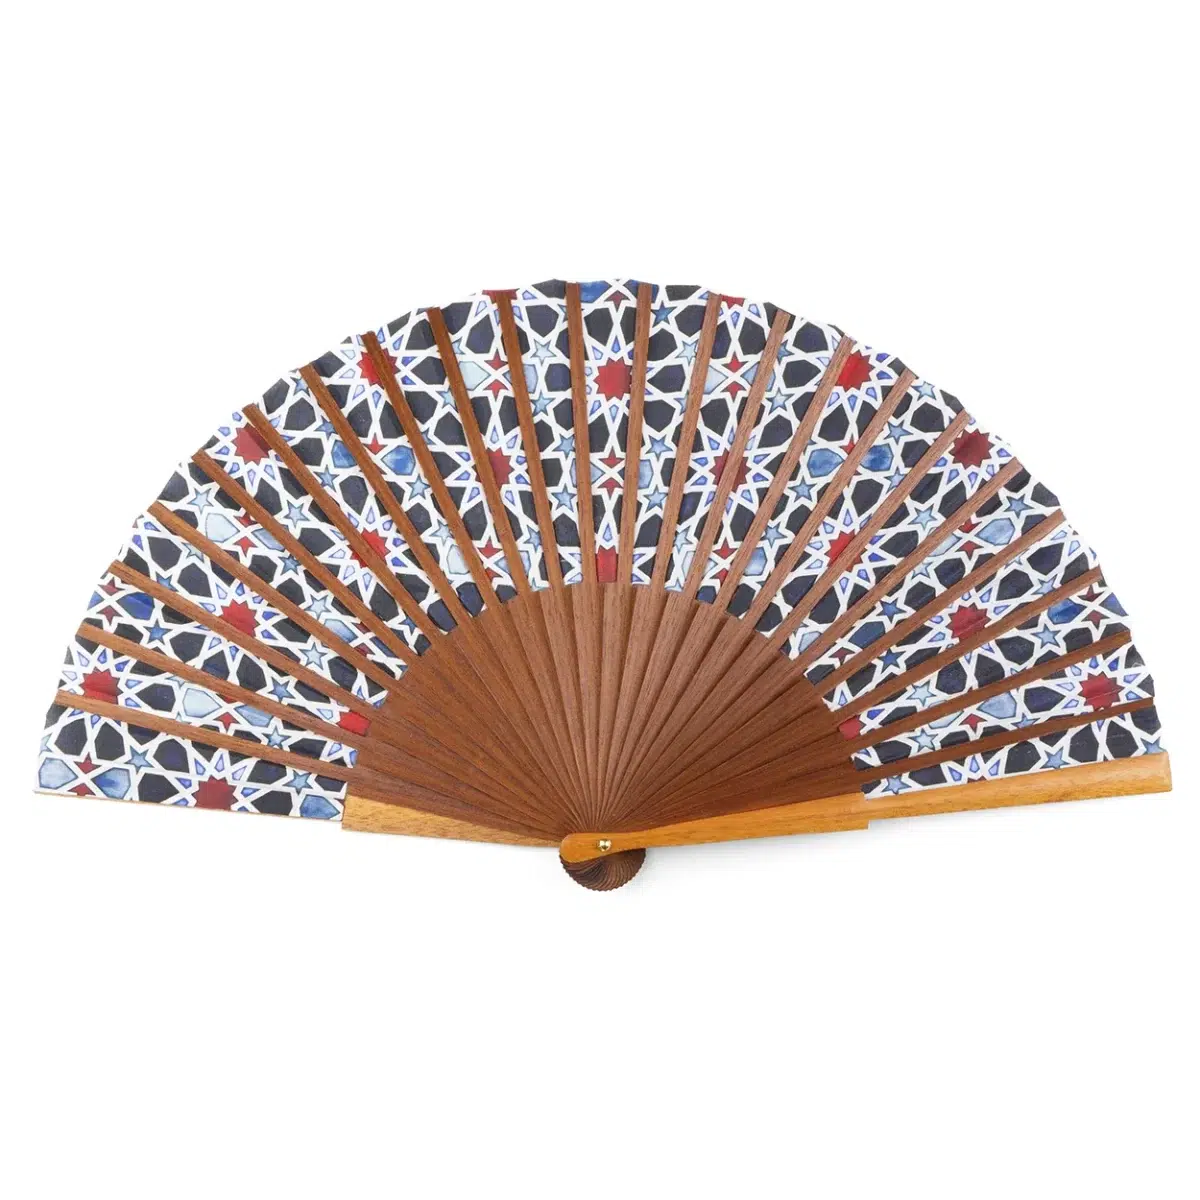 Silk fan with natural wood, inspired by Arab mosaics.